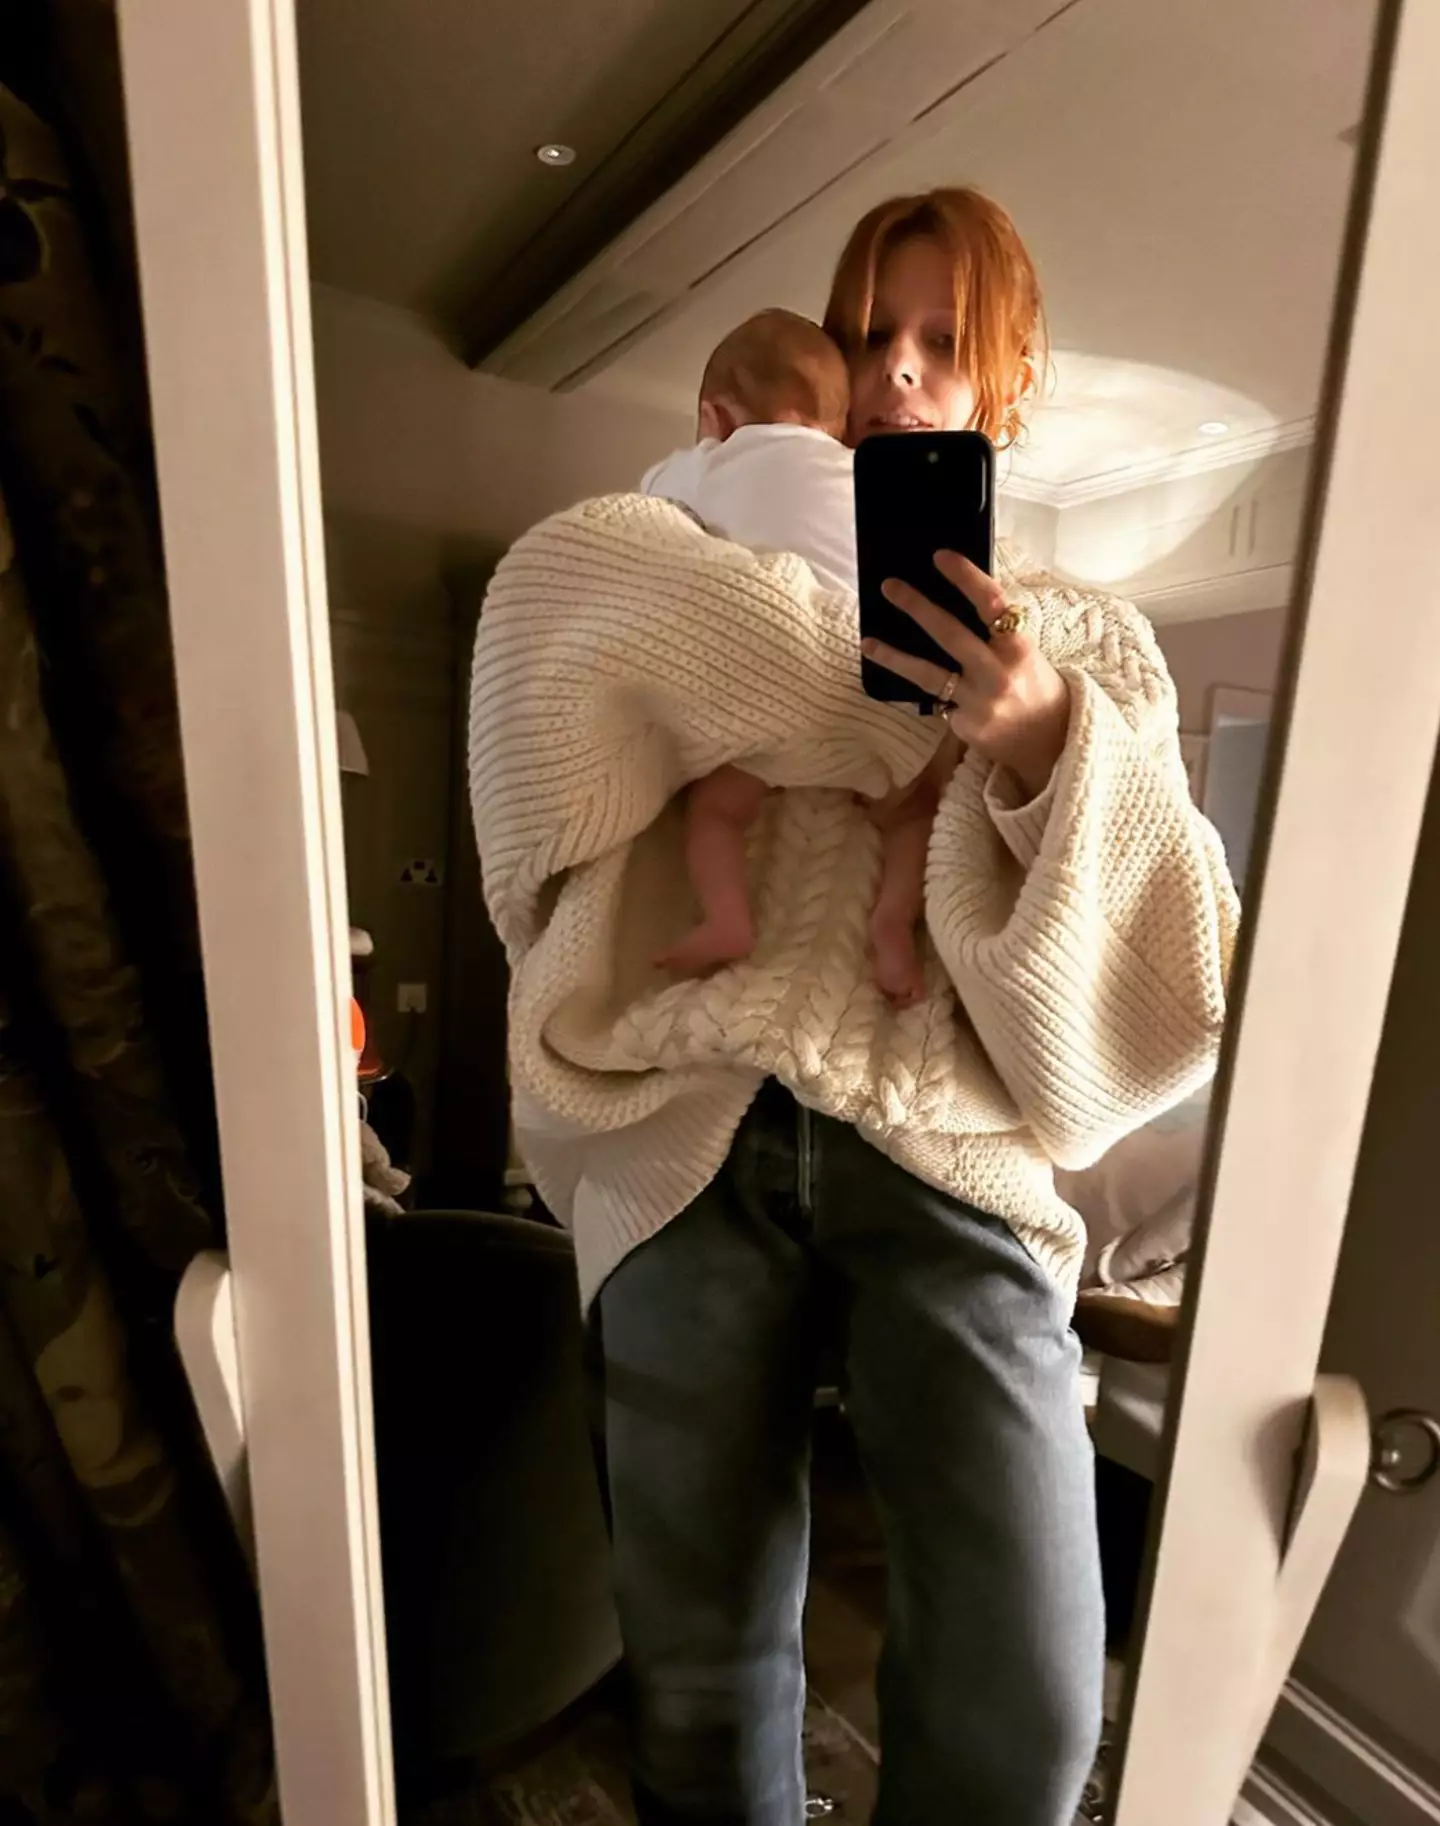 Stacey Dooley welcomed her first child, Minnie, in January.